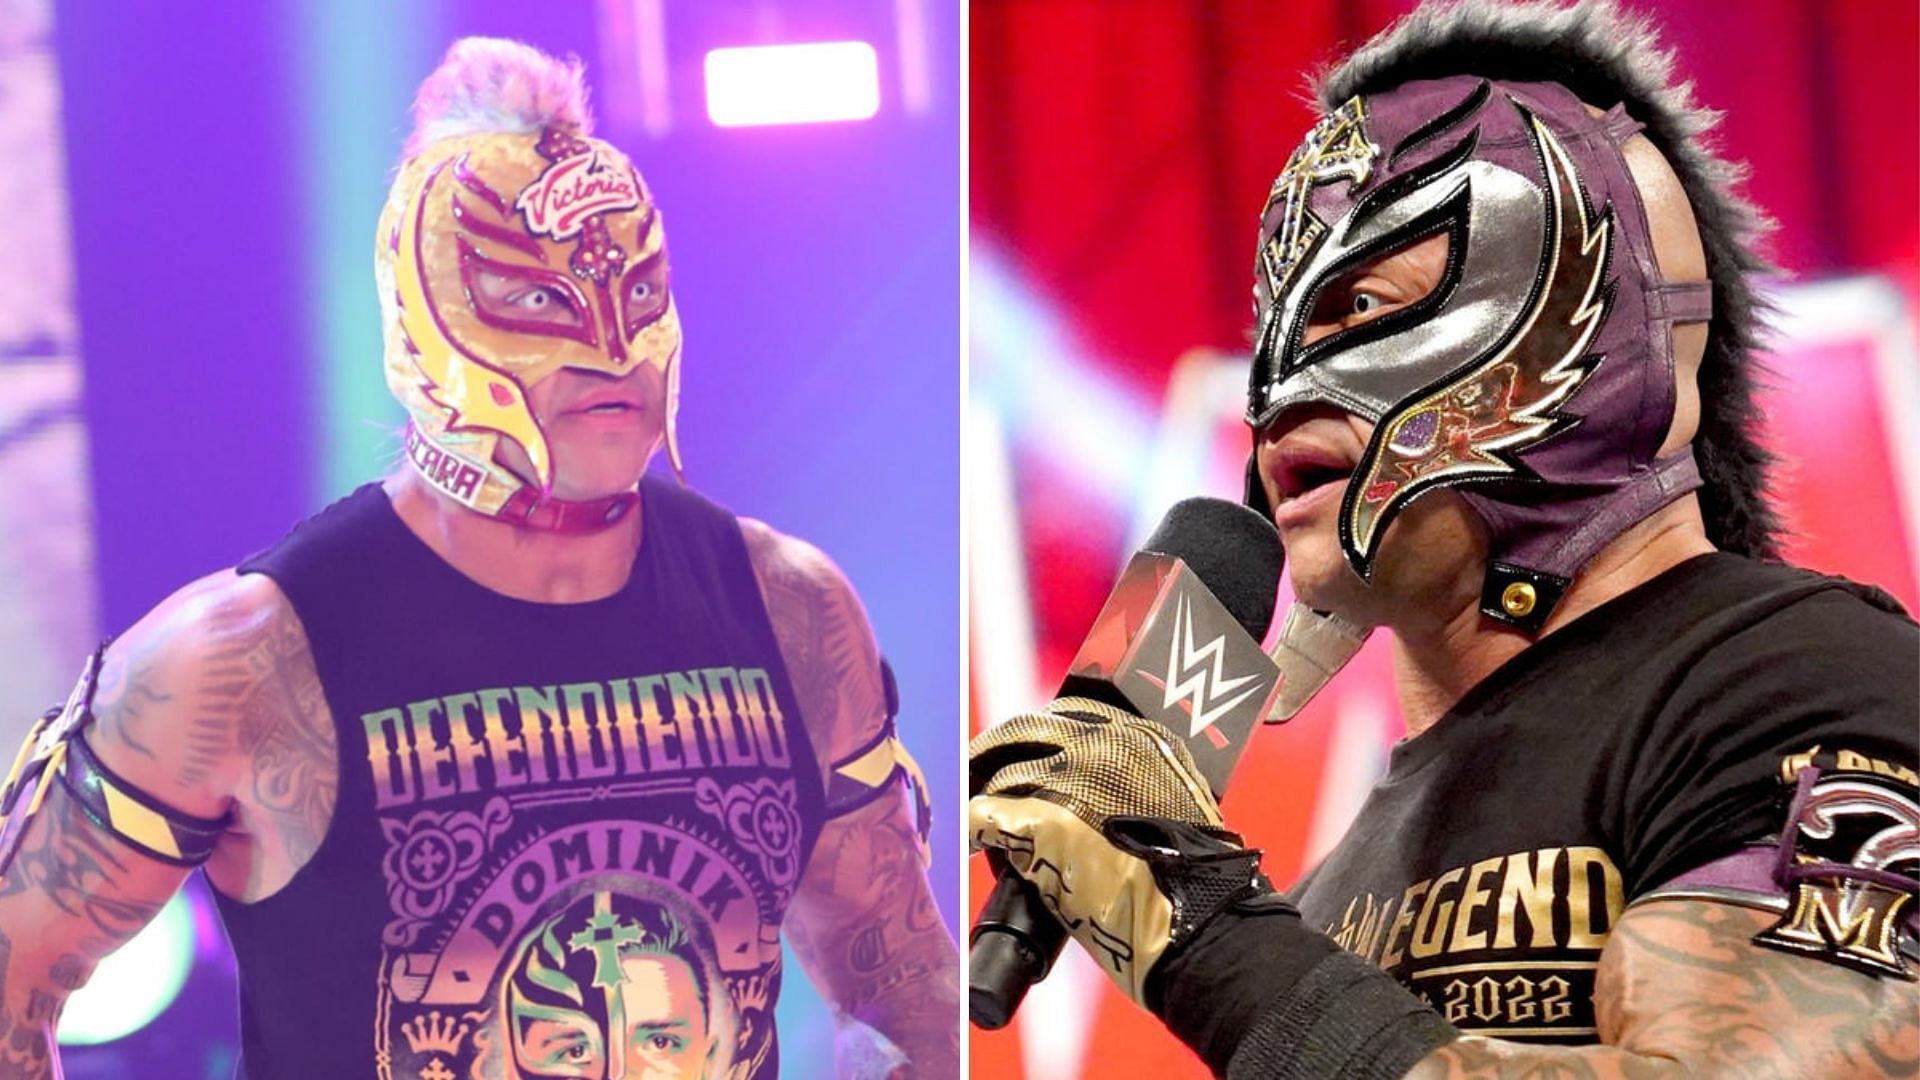 Rey Mysterio recently challenged Gunther for the Intercontinental Championship